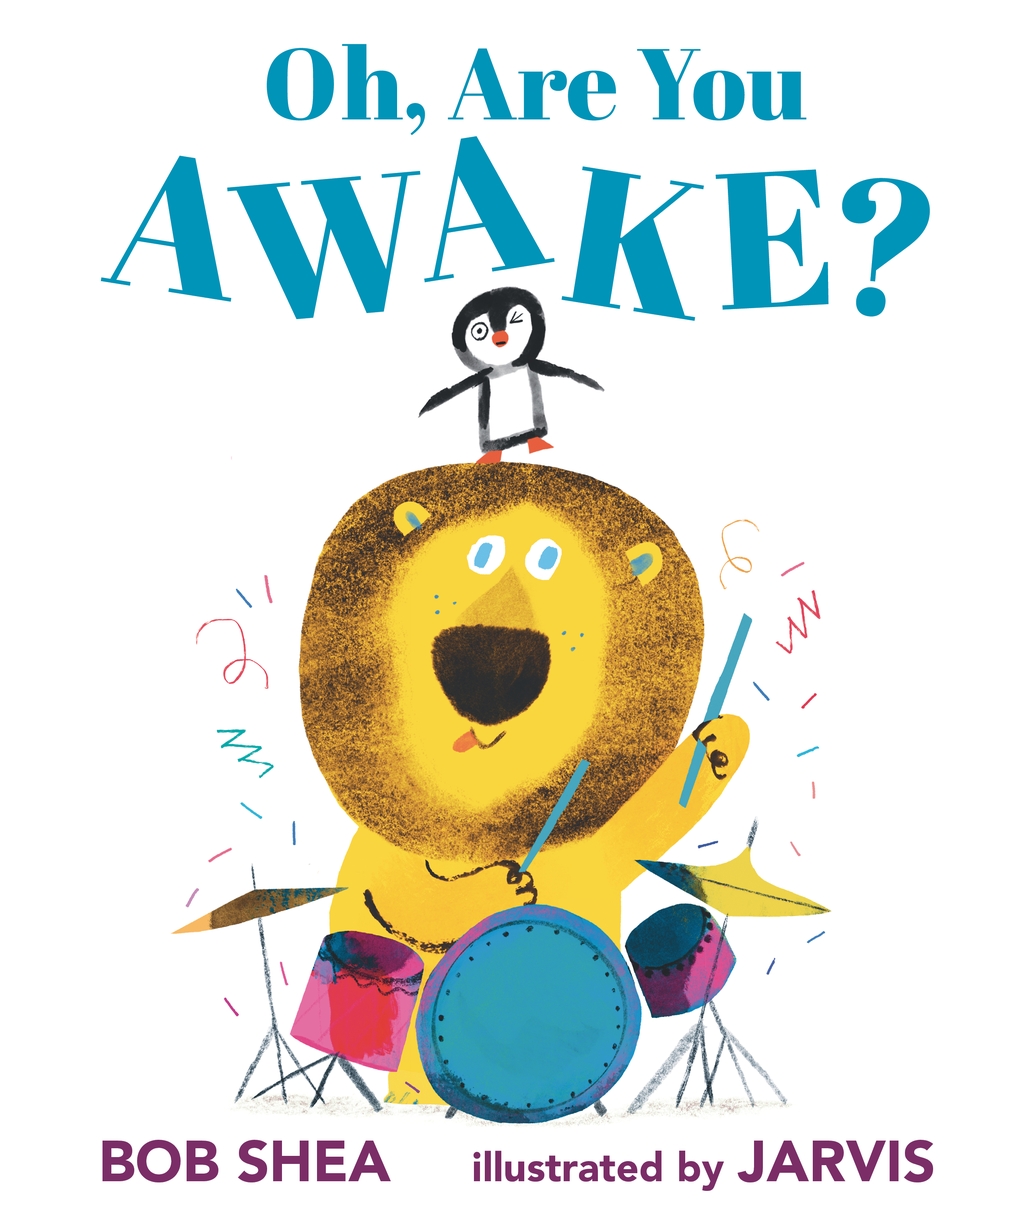 Cover illustration for "Oh, Are You Awake?: showing a lion playing drums, with a penguin on its head.